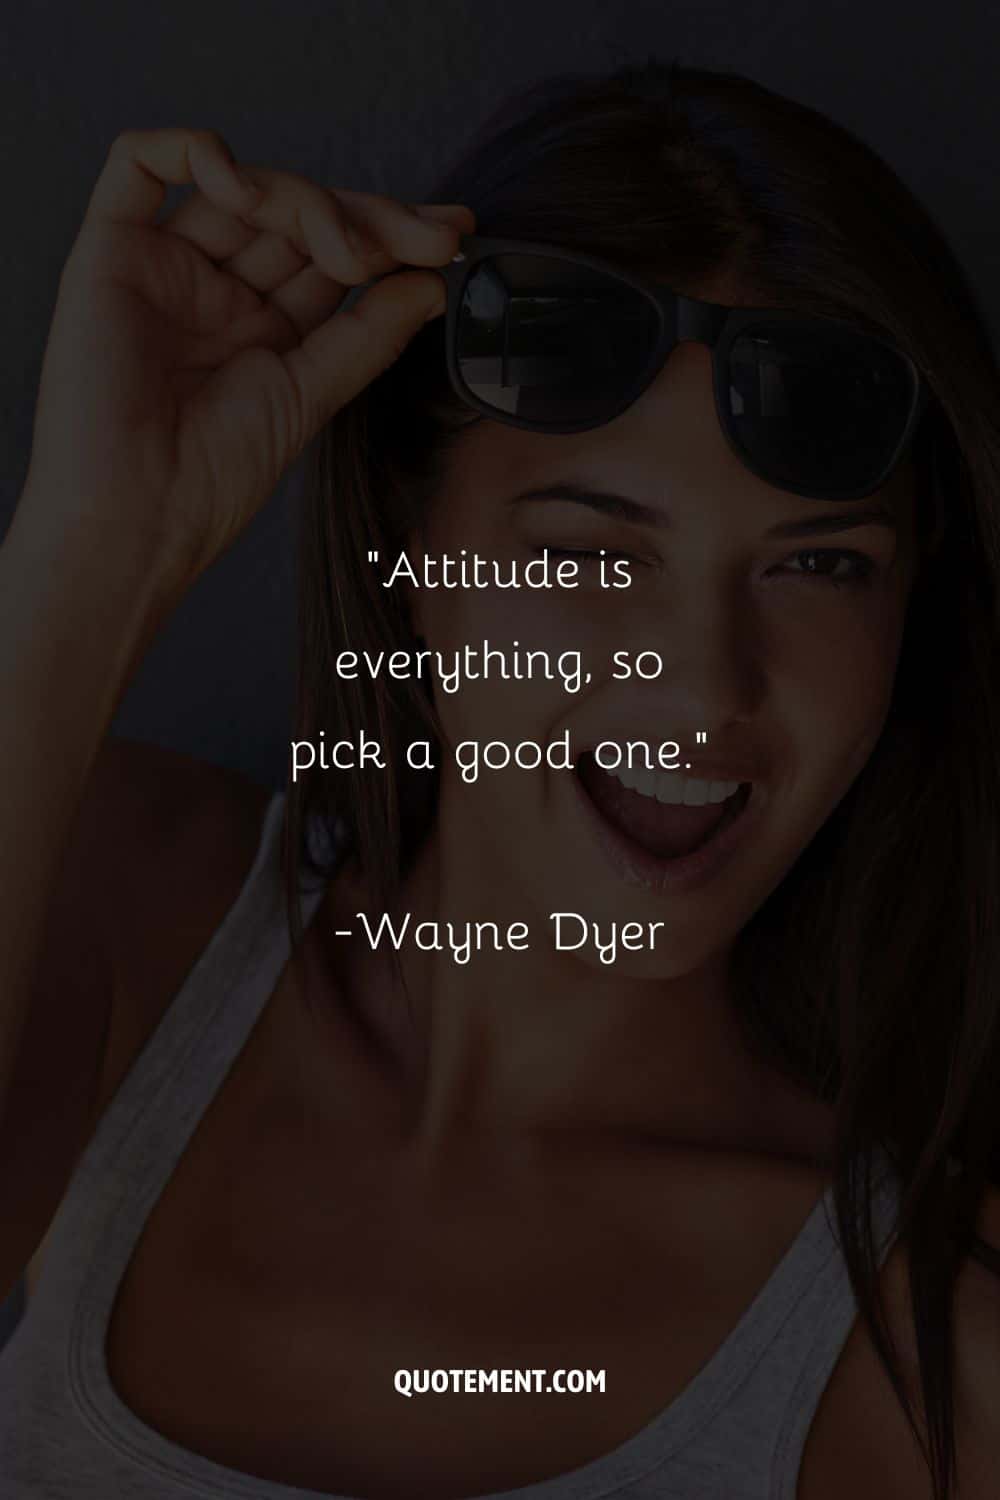 “Attitude is everything, so pick a good one.” – Wayne Dyer